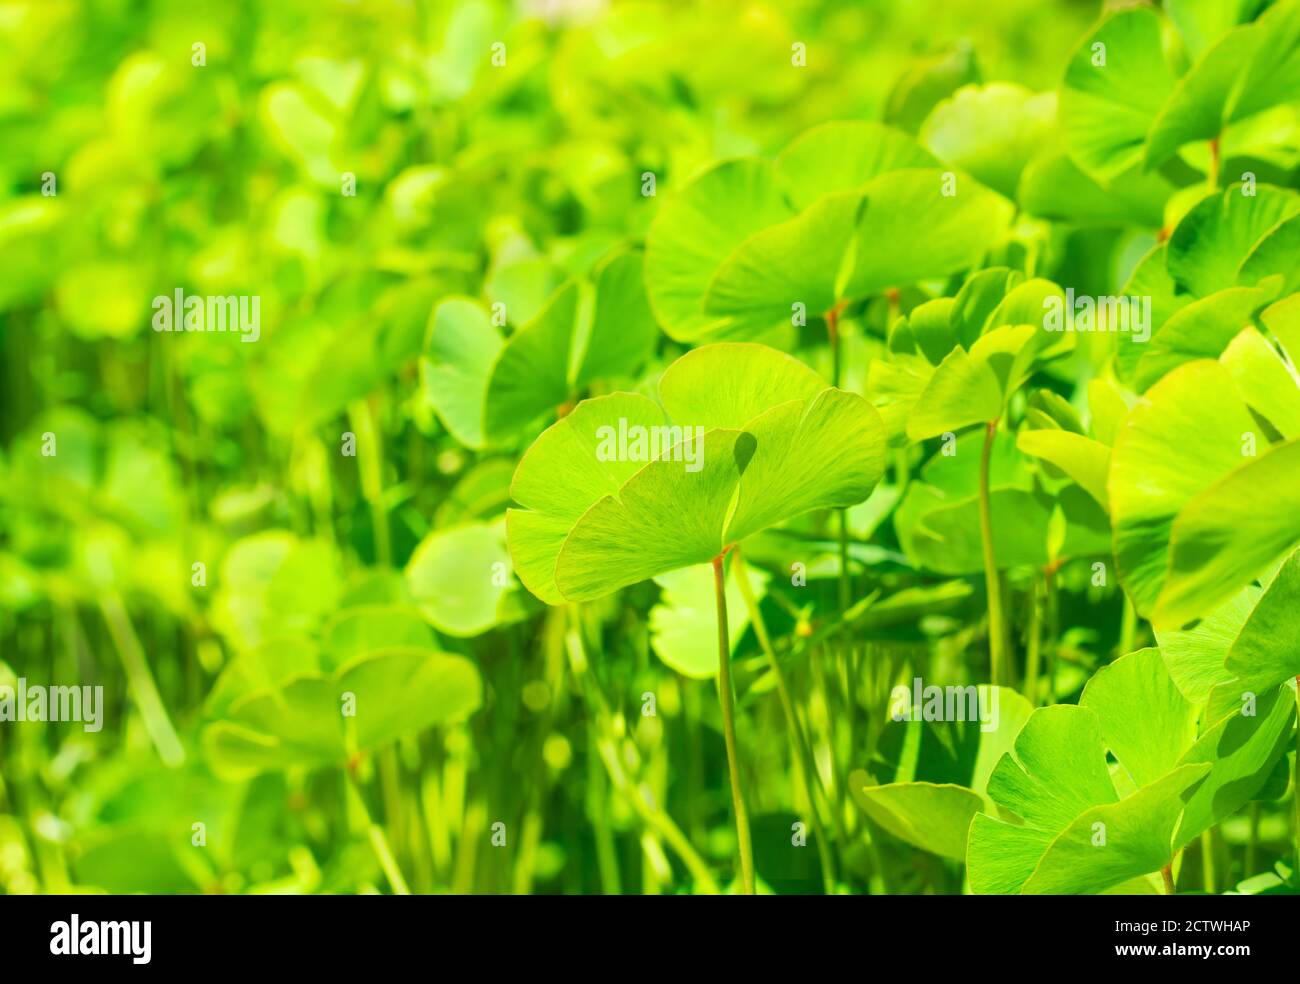 Marsilea  leaf on blurred green background in horizontal format Stock Photo